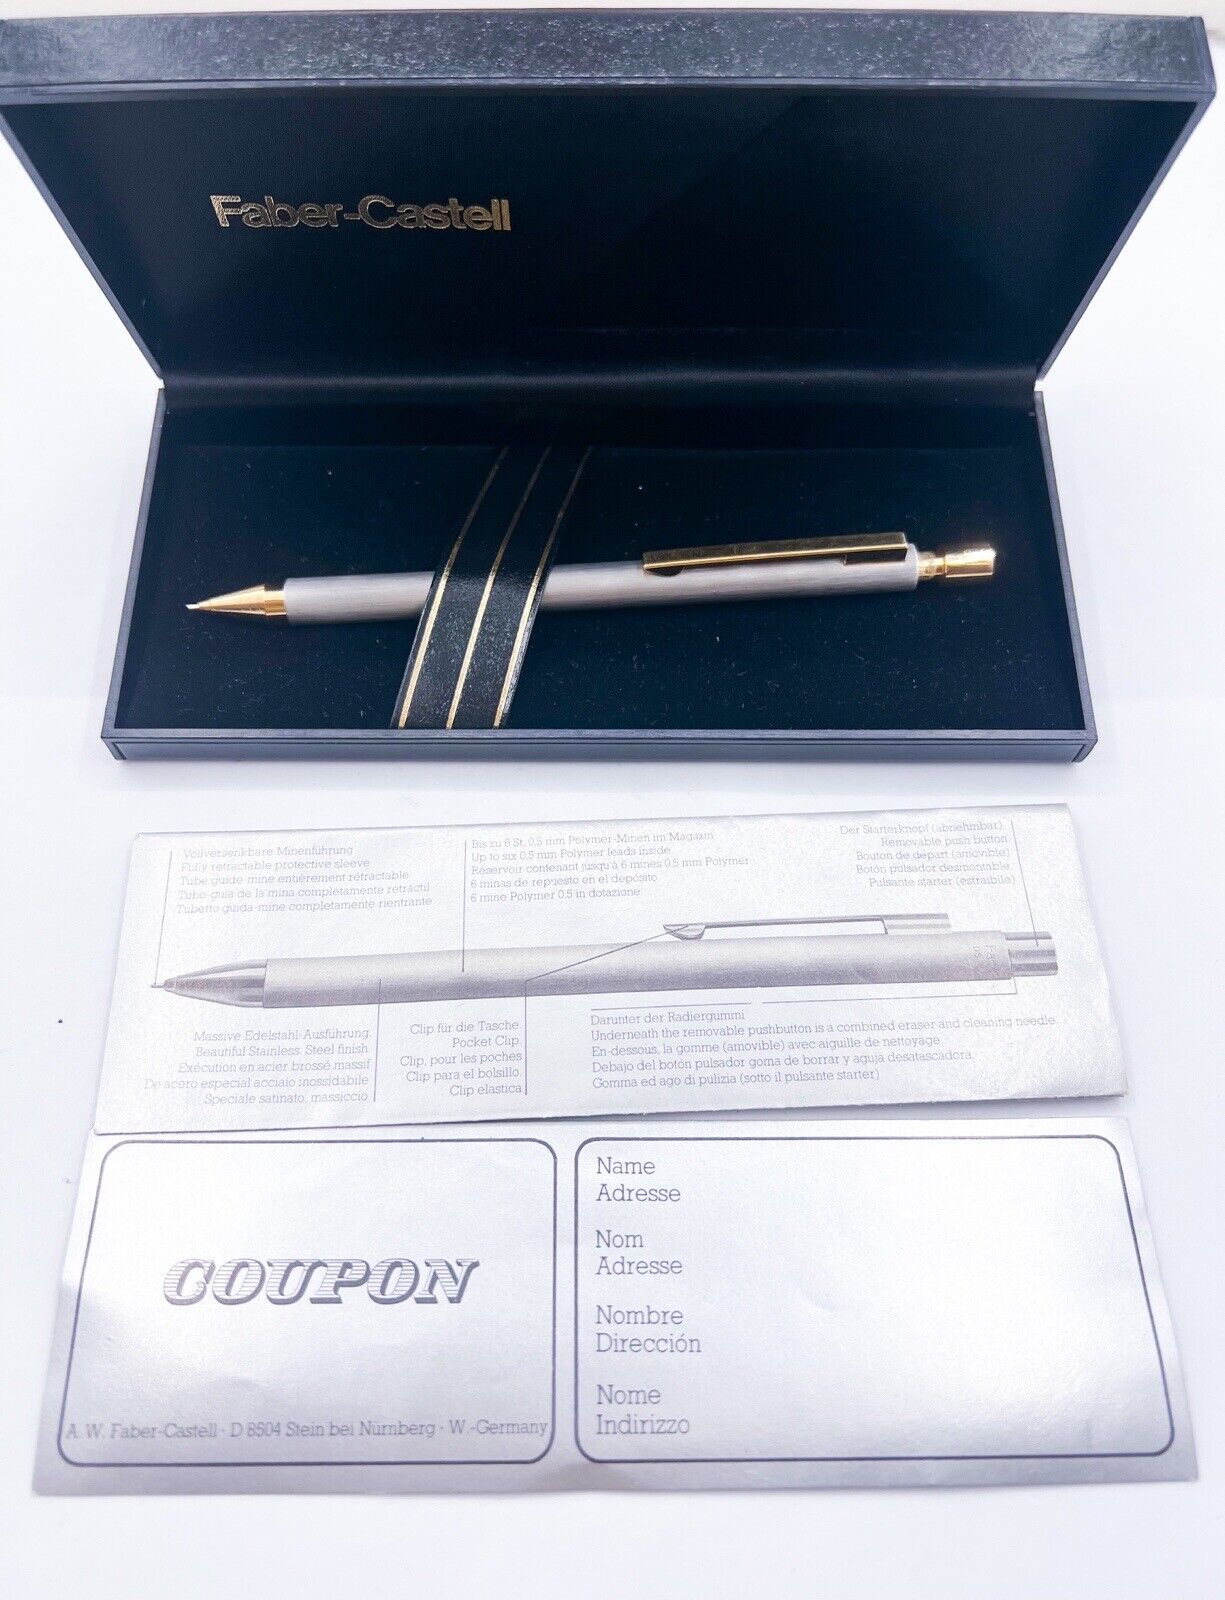 Faber Castell DS 75 W.Germany 0.5mm Mechanical Pencil in original Box 